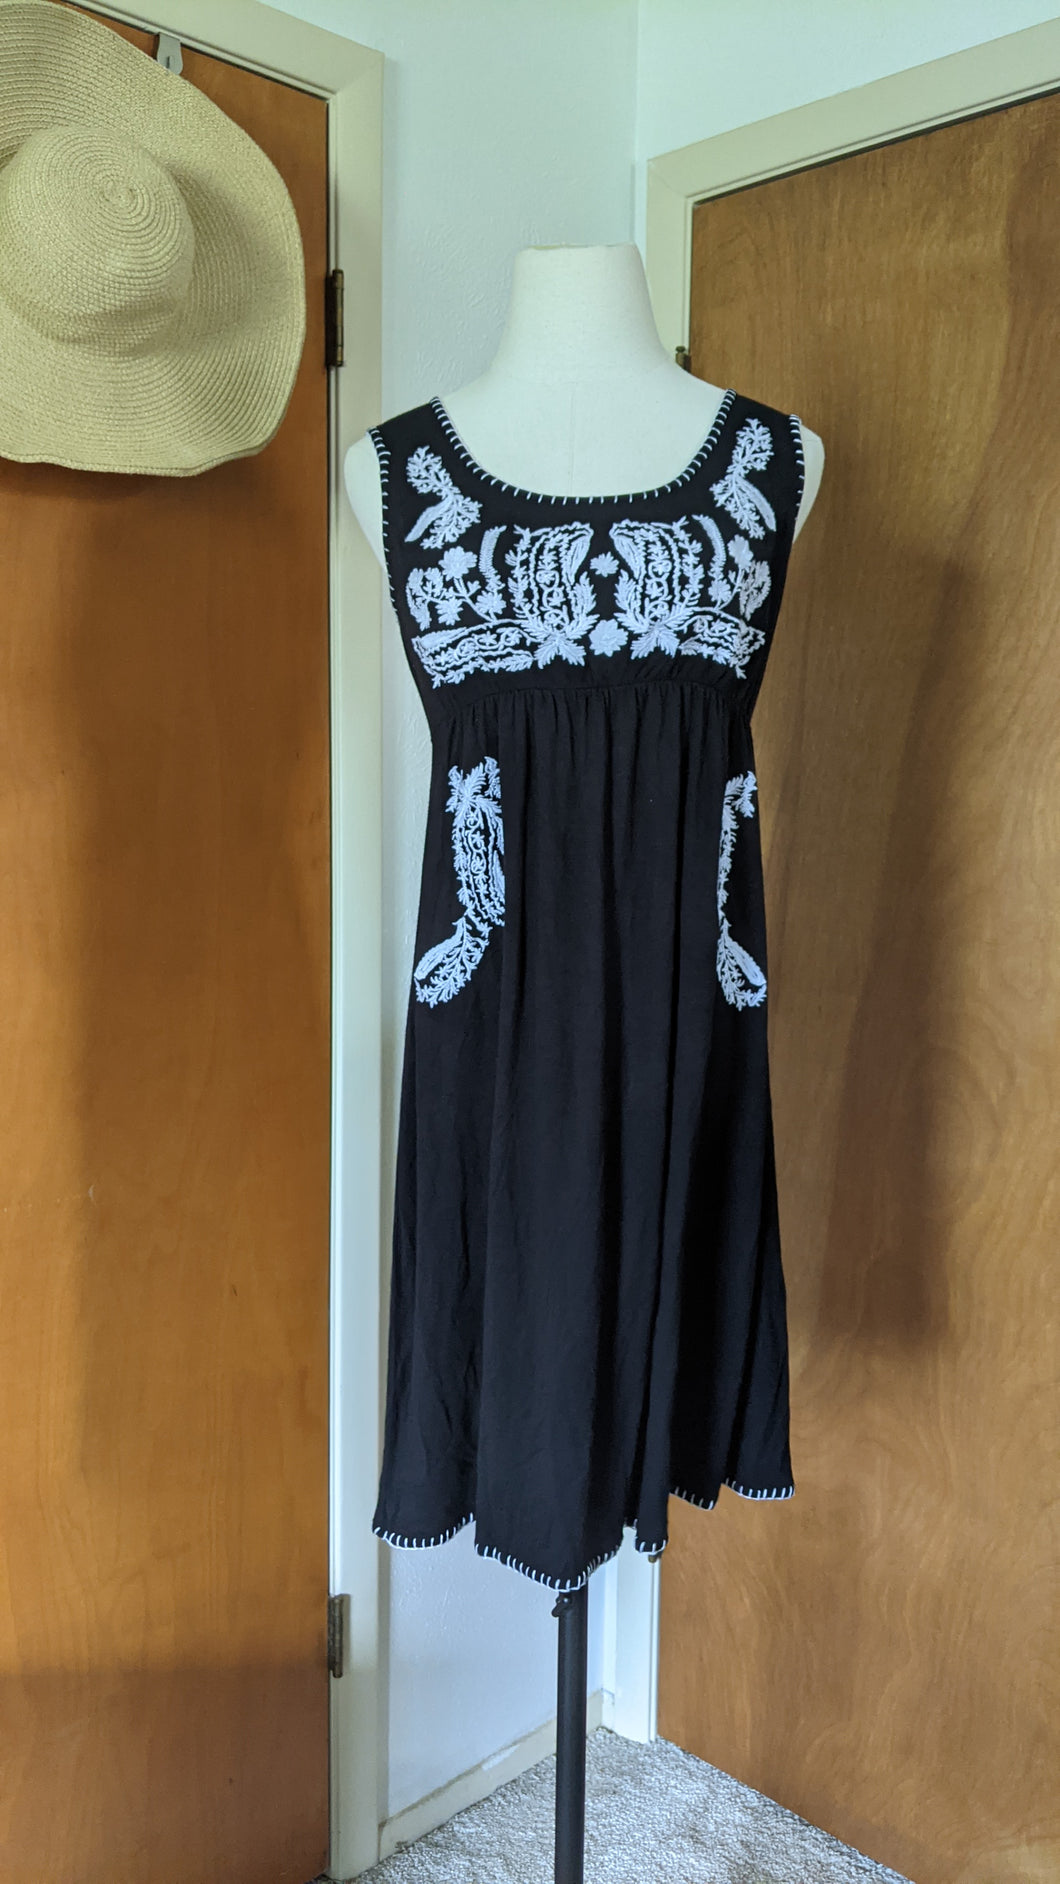 S - Black embroidered dress